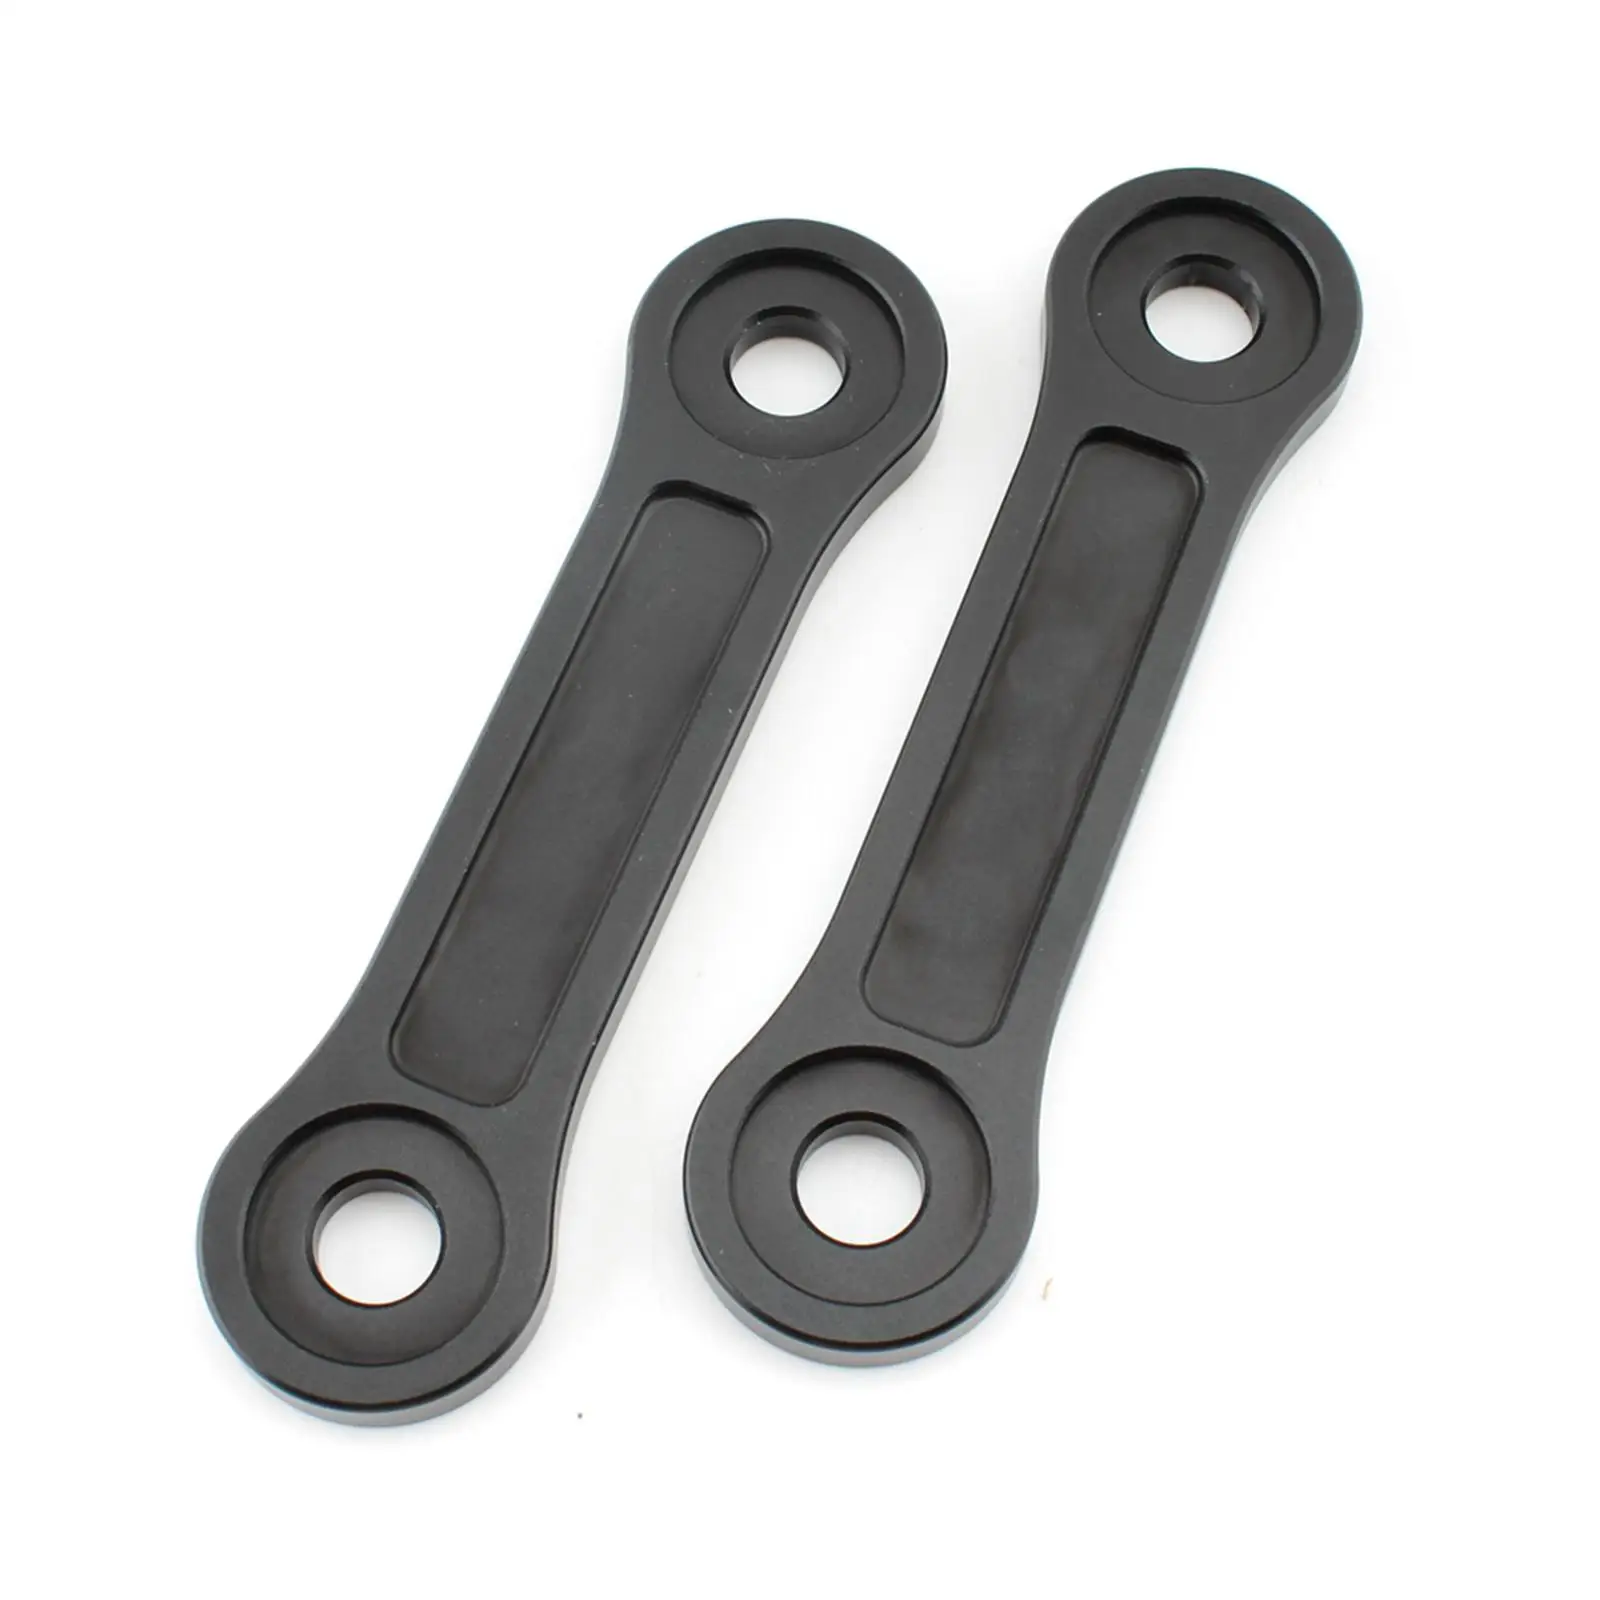 2x Motorcycle Rear Lowering Kit Easy Installation Aluminium Alloy Accessories 20mm for Tiger 1200 GT Pro Rally Explorer